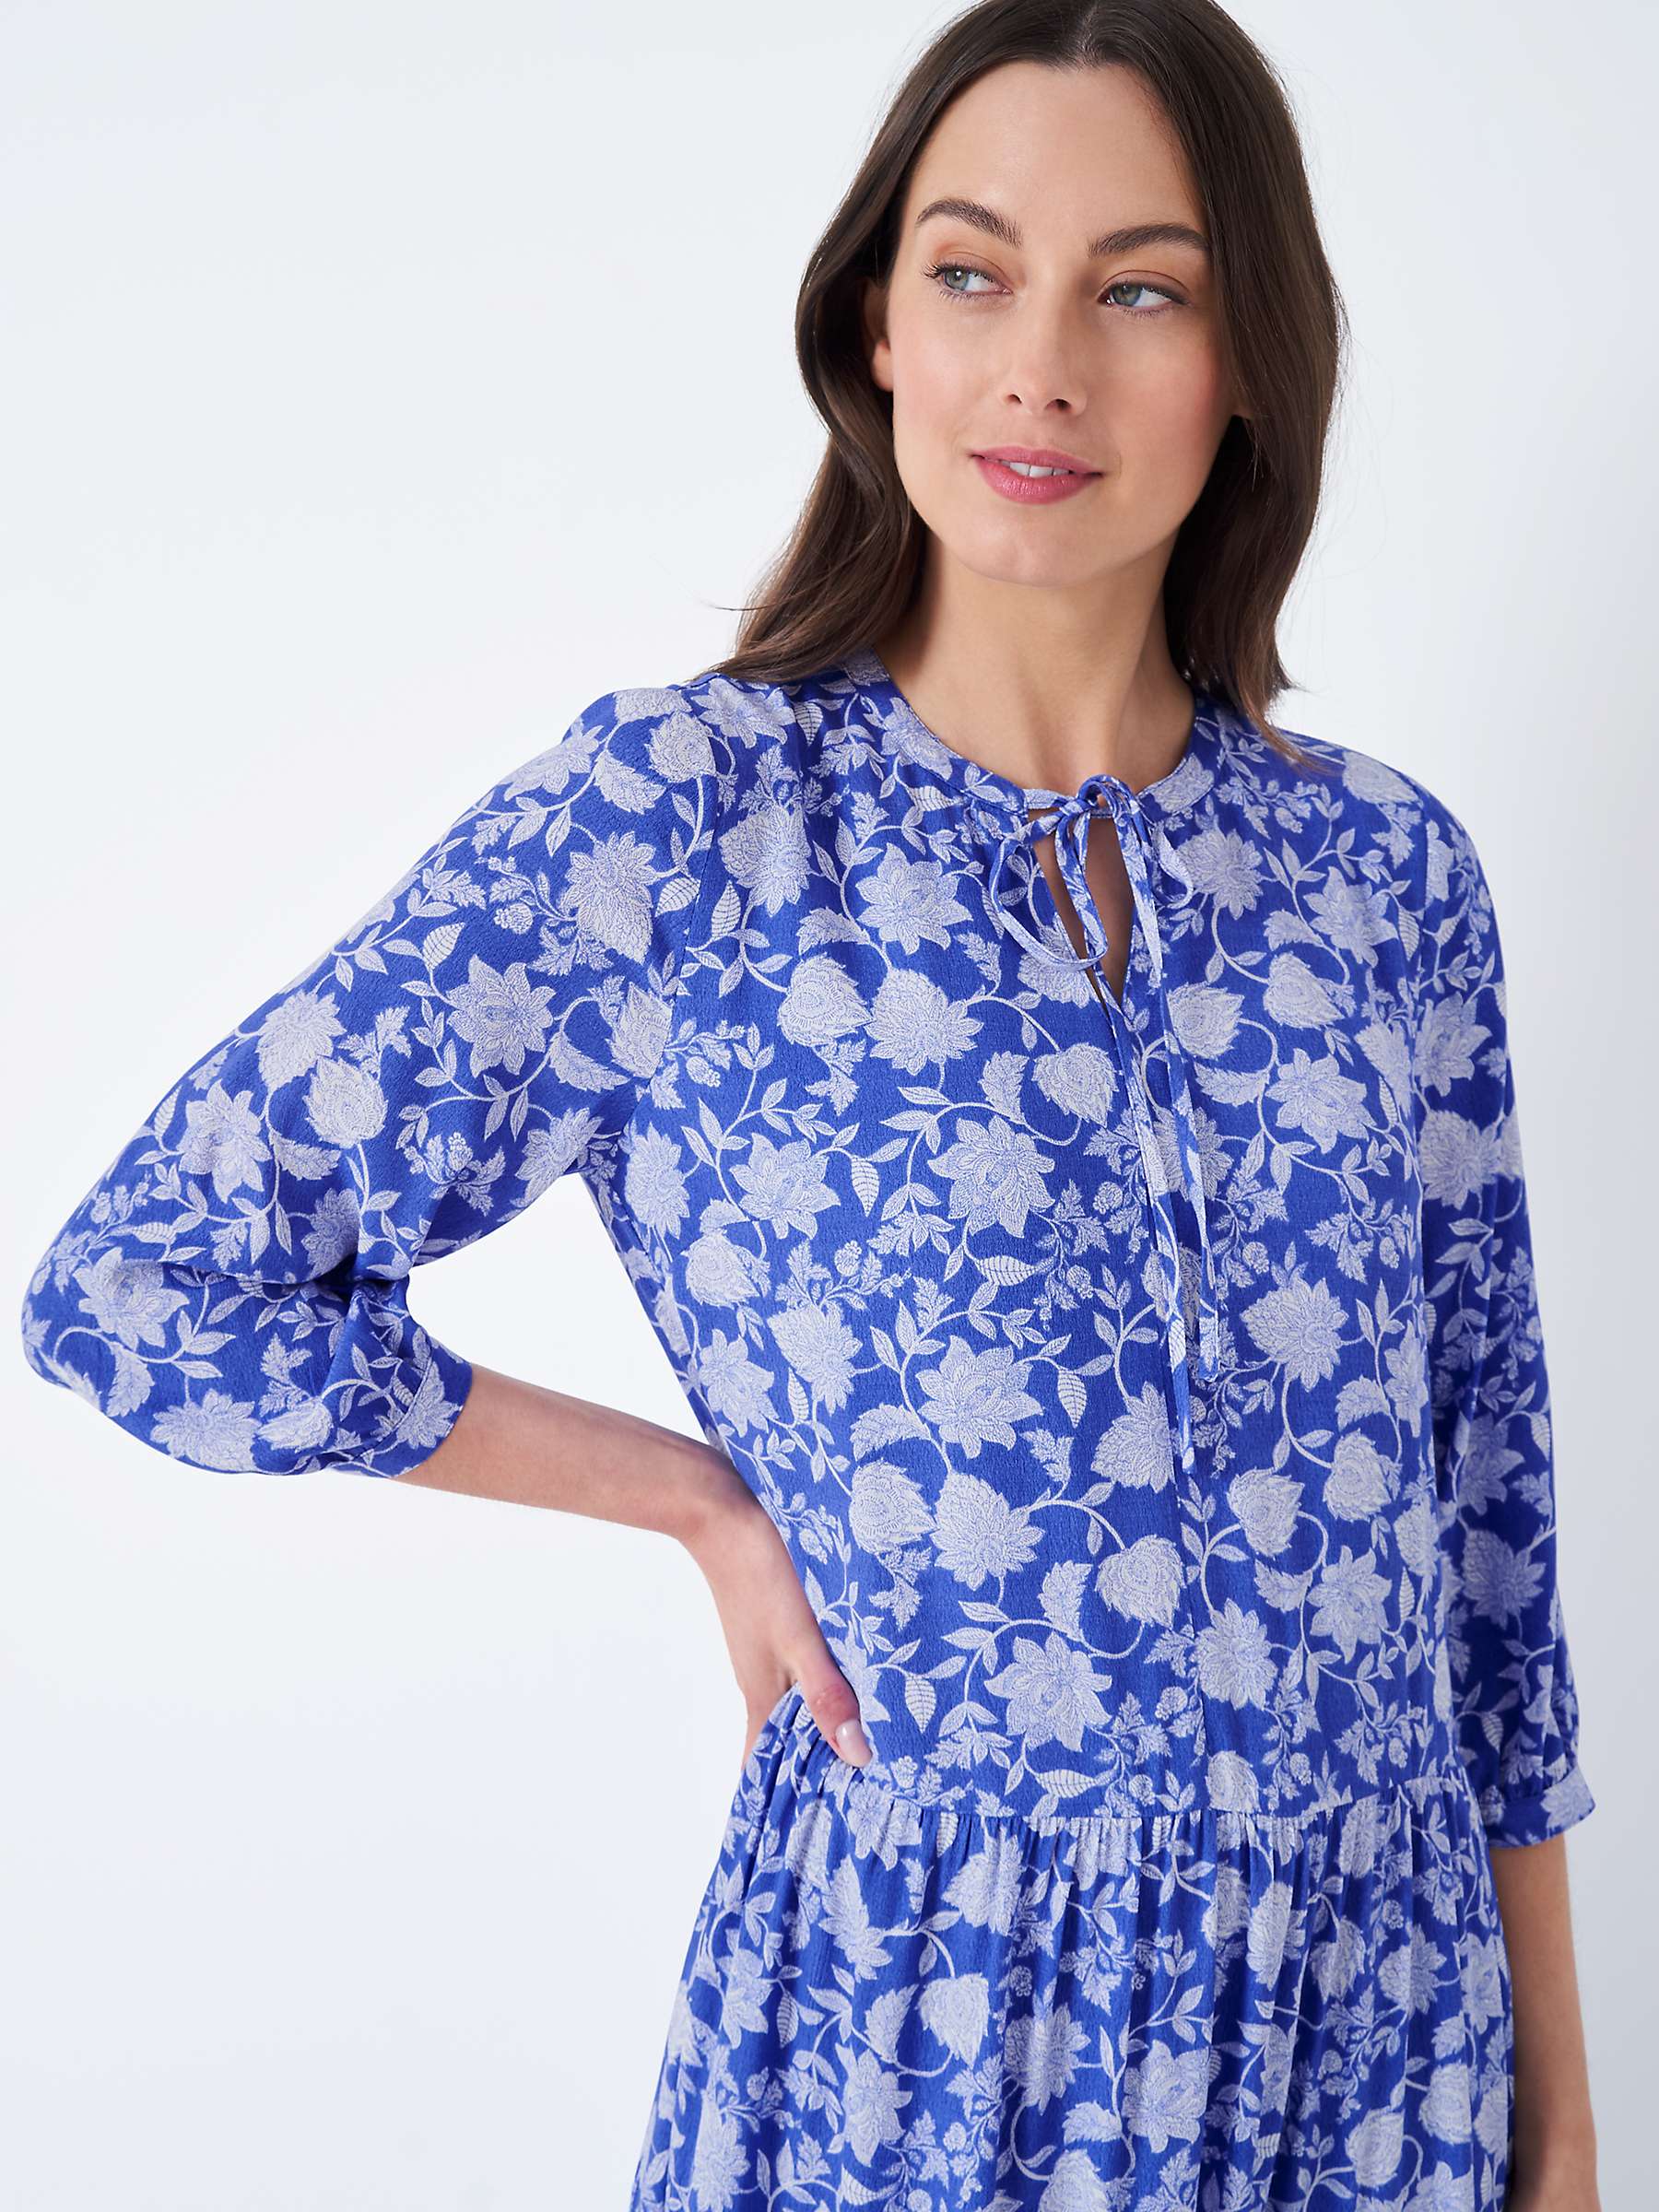 Buy Crew Clothing Nellie Floral Print Midi Dress, Bright Blue Online at johnlewis.com